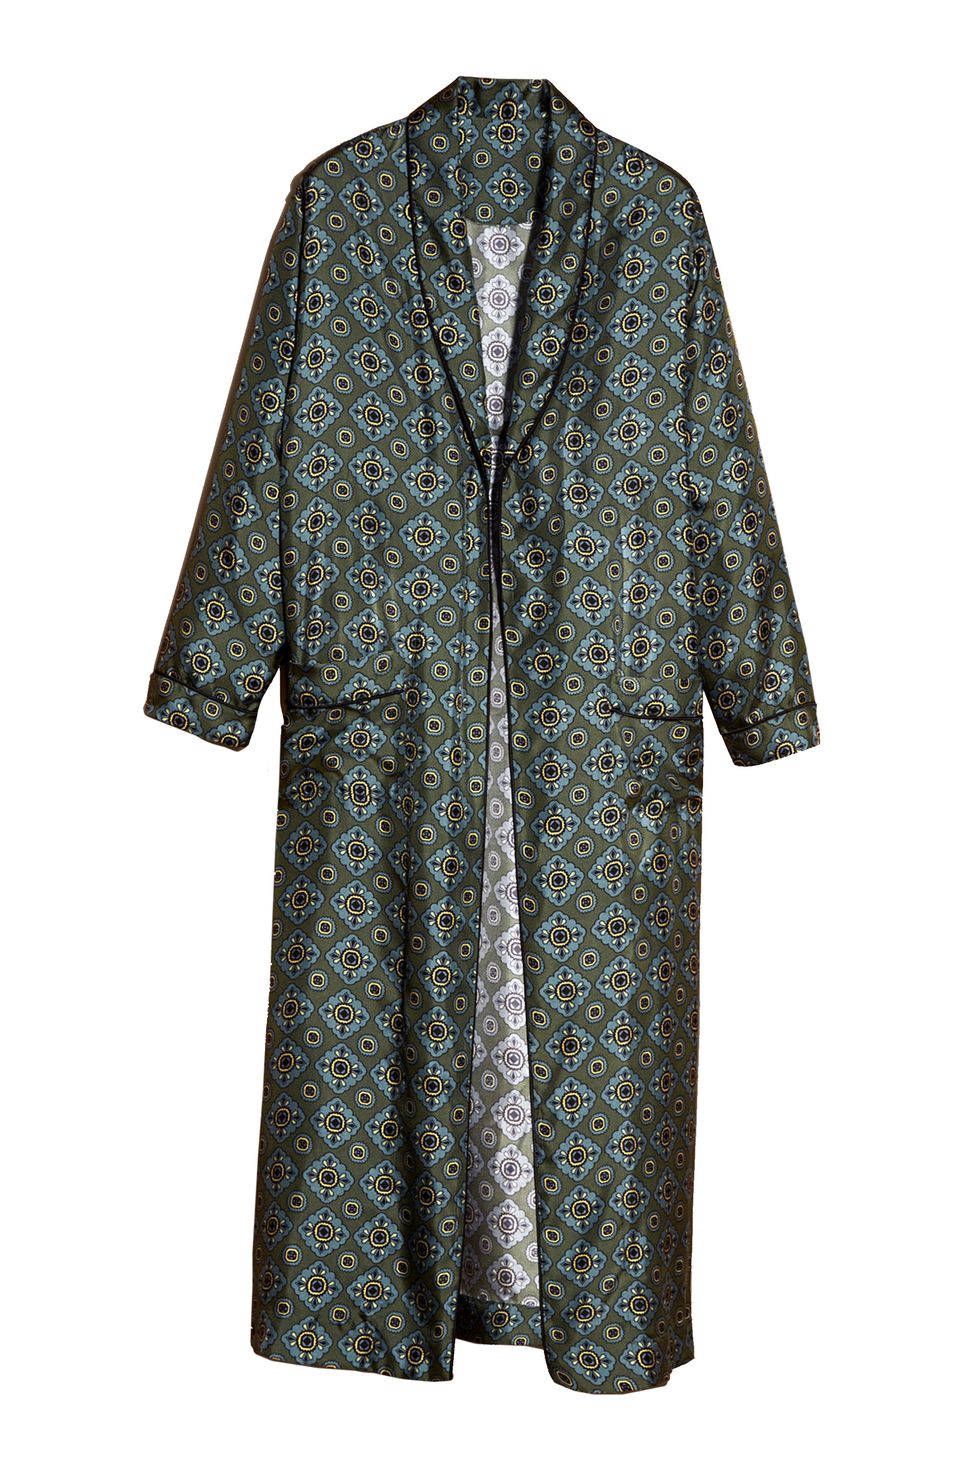 <p>
Burberry Geometric Tile Print Silk Twill Dressing Gown Coat, $1,995; <a href="https://us.burberry.com/geometric-tile-print-silk-twill-dressing-gown-coat-p45454841?search=true">burberry.com</a></p><p><span class="redactor-invisible-space" data-verified="redactor" data-redactor-tag="span" data-redactor-class="redactor-invisible-space"></span></p>